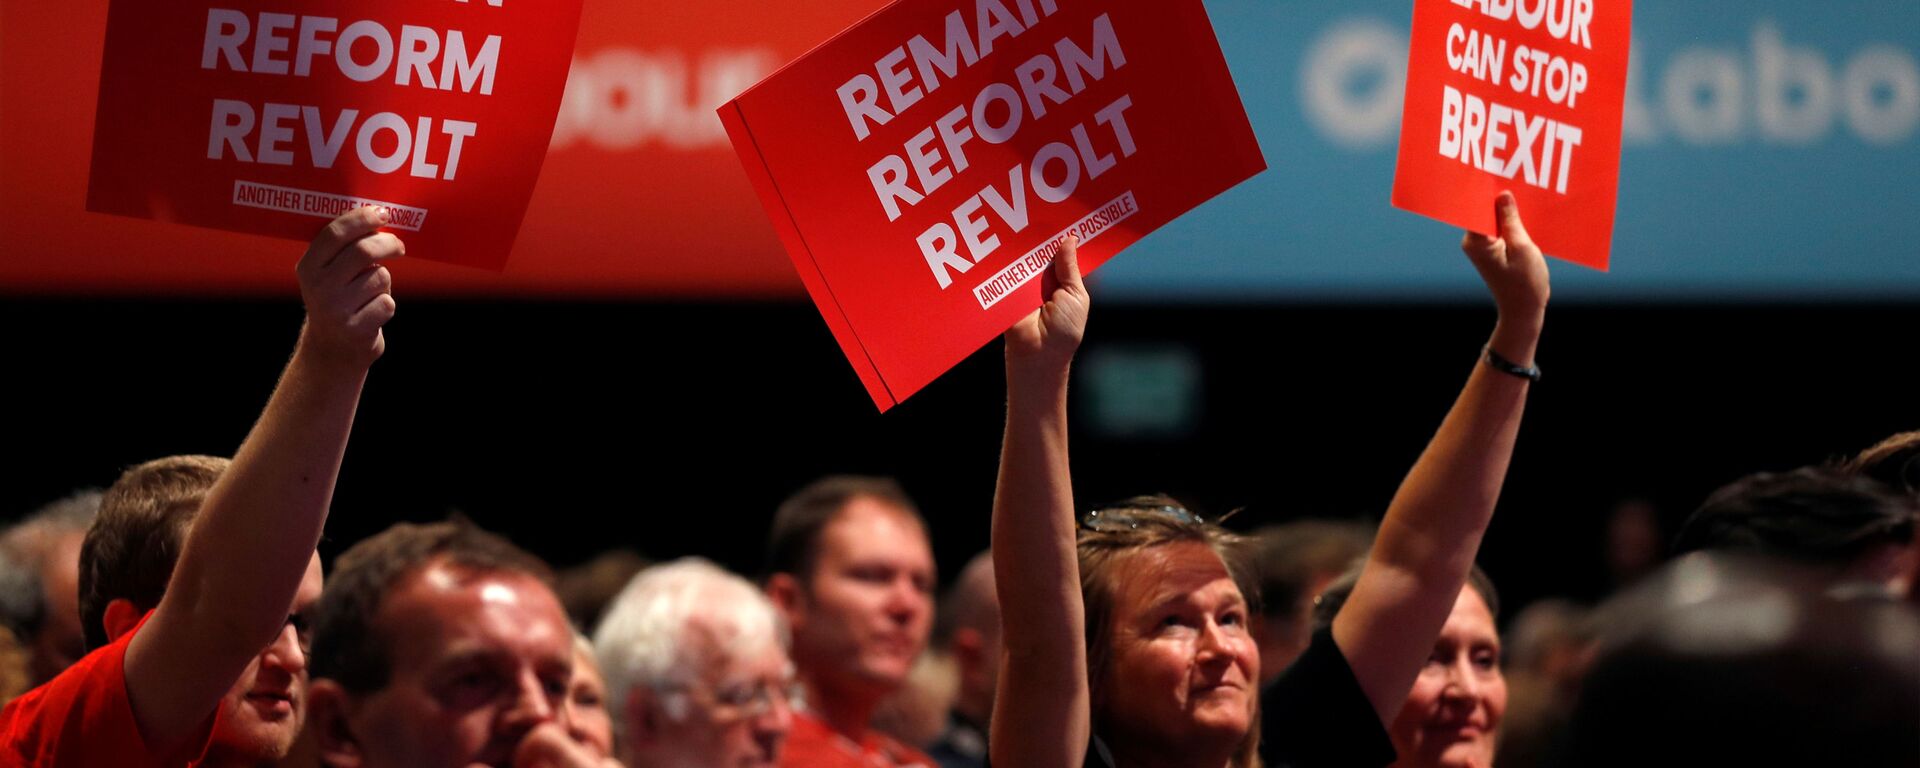 Labour party supporters hold anti-Brexit signs during the Labour party annual conference in Brighton, Britain September 23, 2019.   - Sputnik International, 1920, 07.10.2019